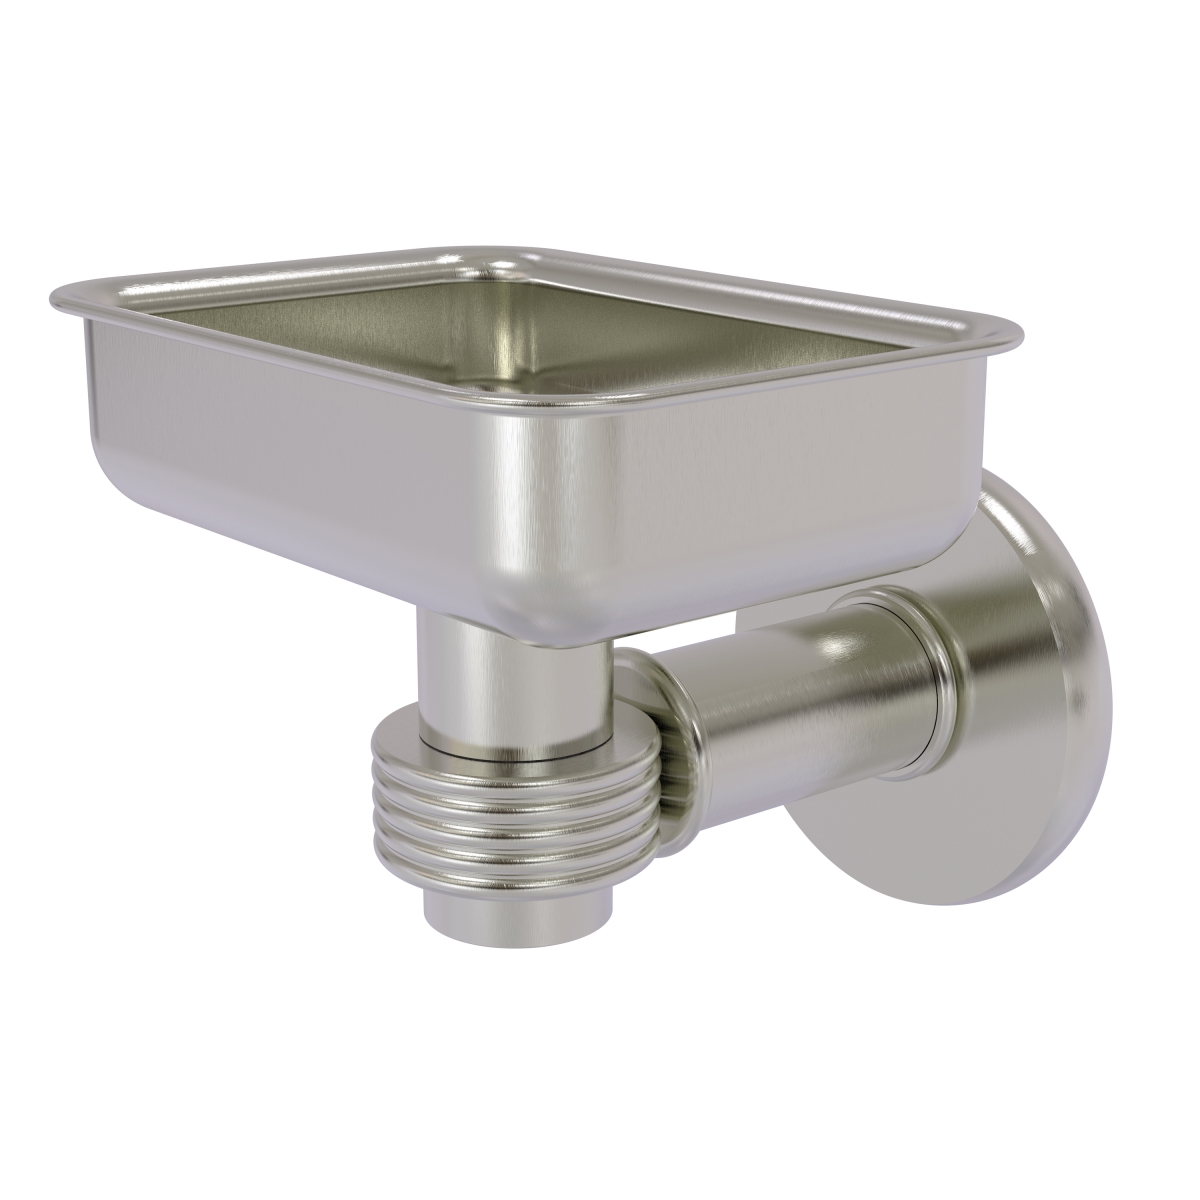 Picture of Allied Brass 2032G-SN Continental Collection Wall Mounted Soap Dish Holder with Groovy Accents, Satin Nickel